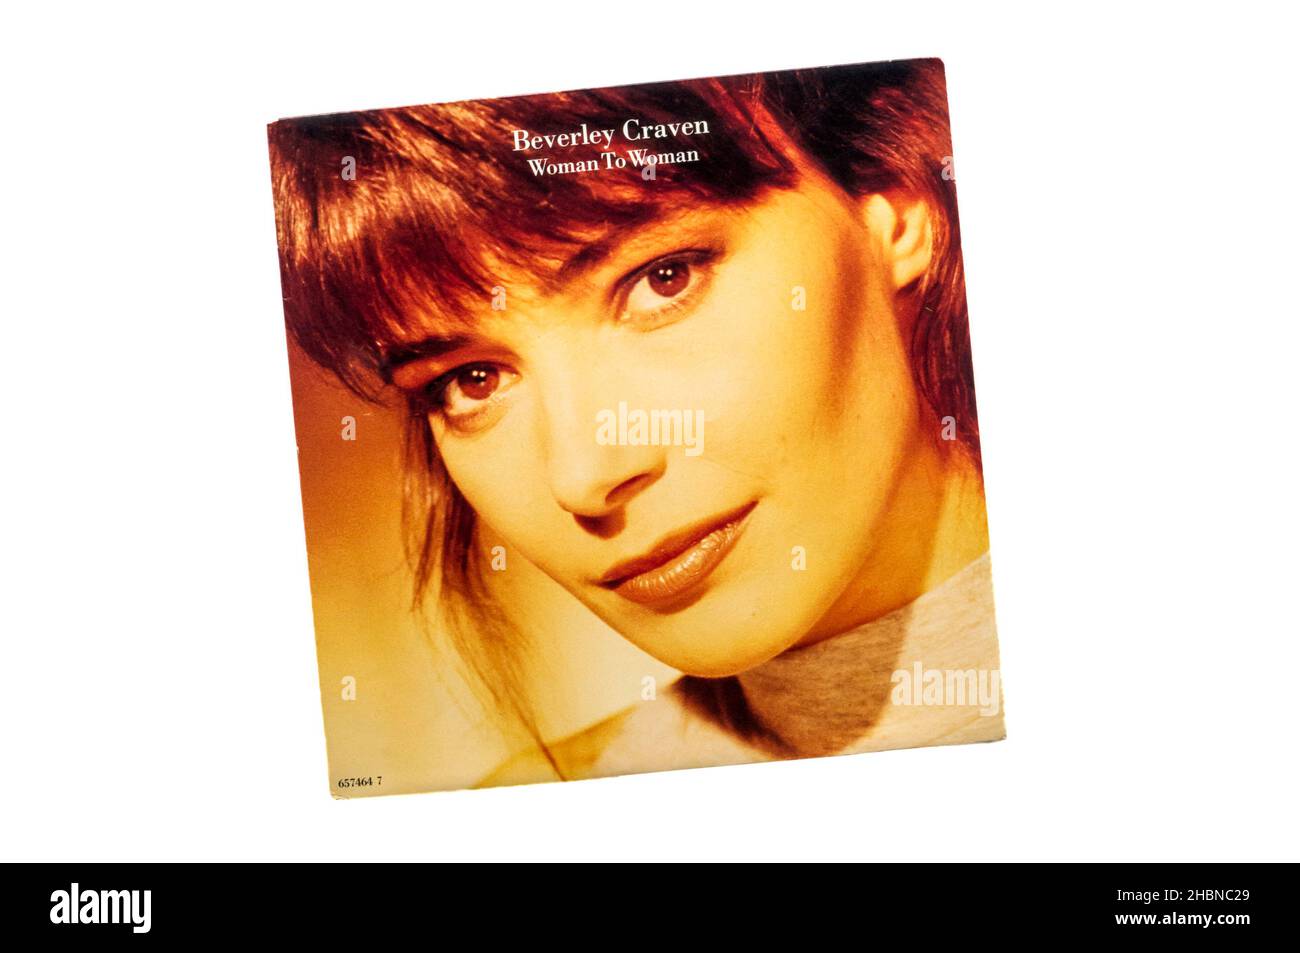 1991 re-issue of 1990 7' single, Woman to Woman by Beverley Craven. Stock Photo